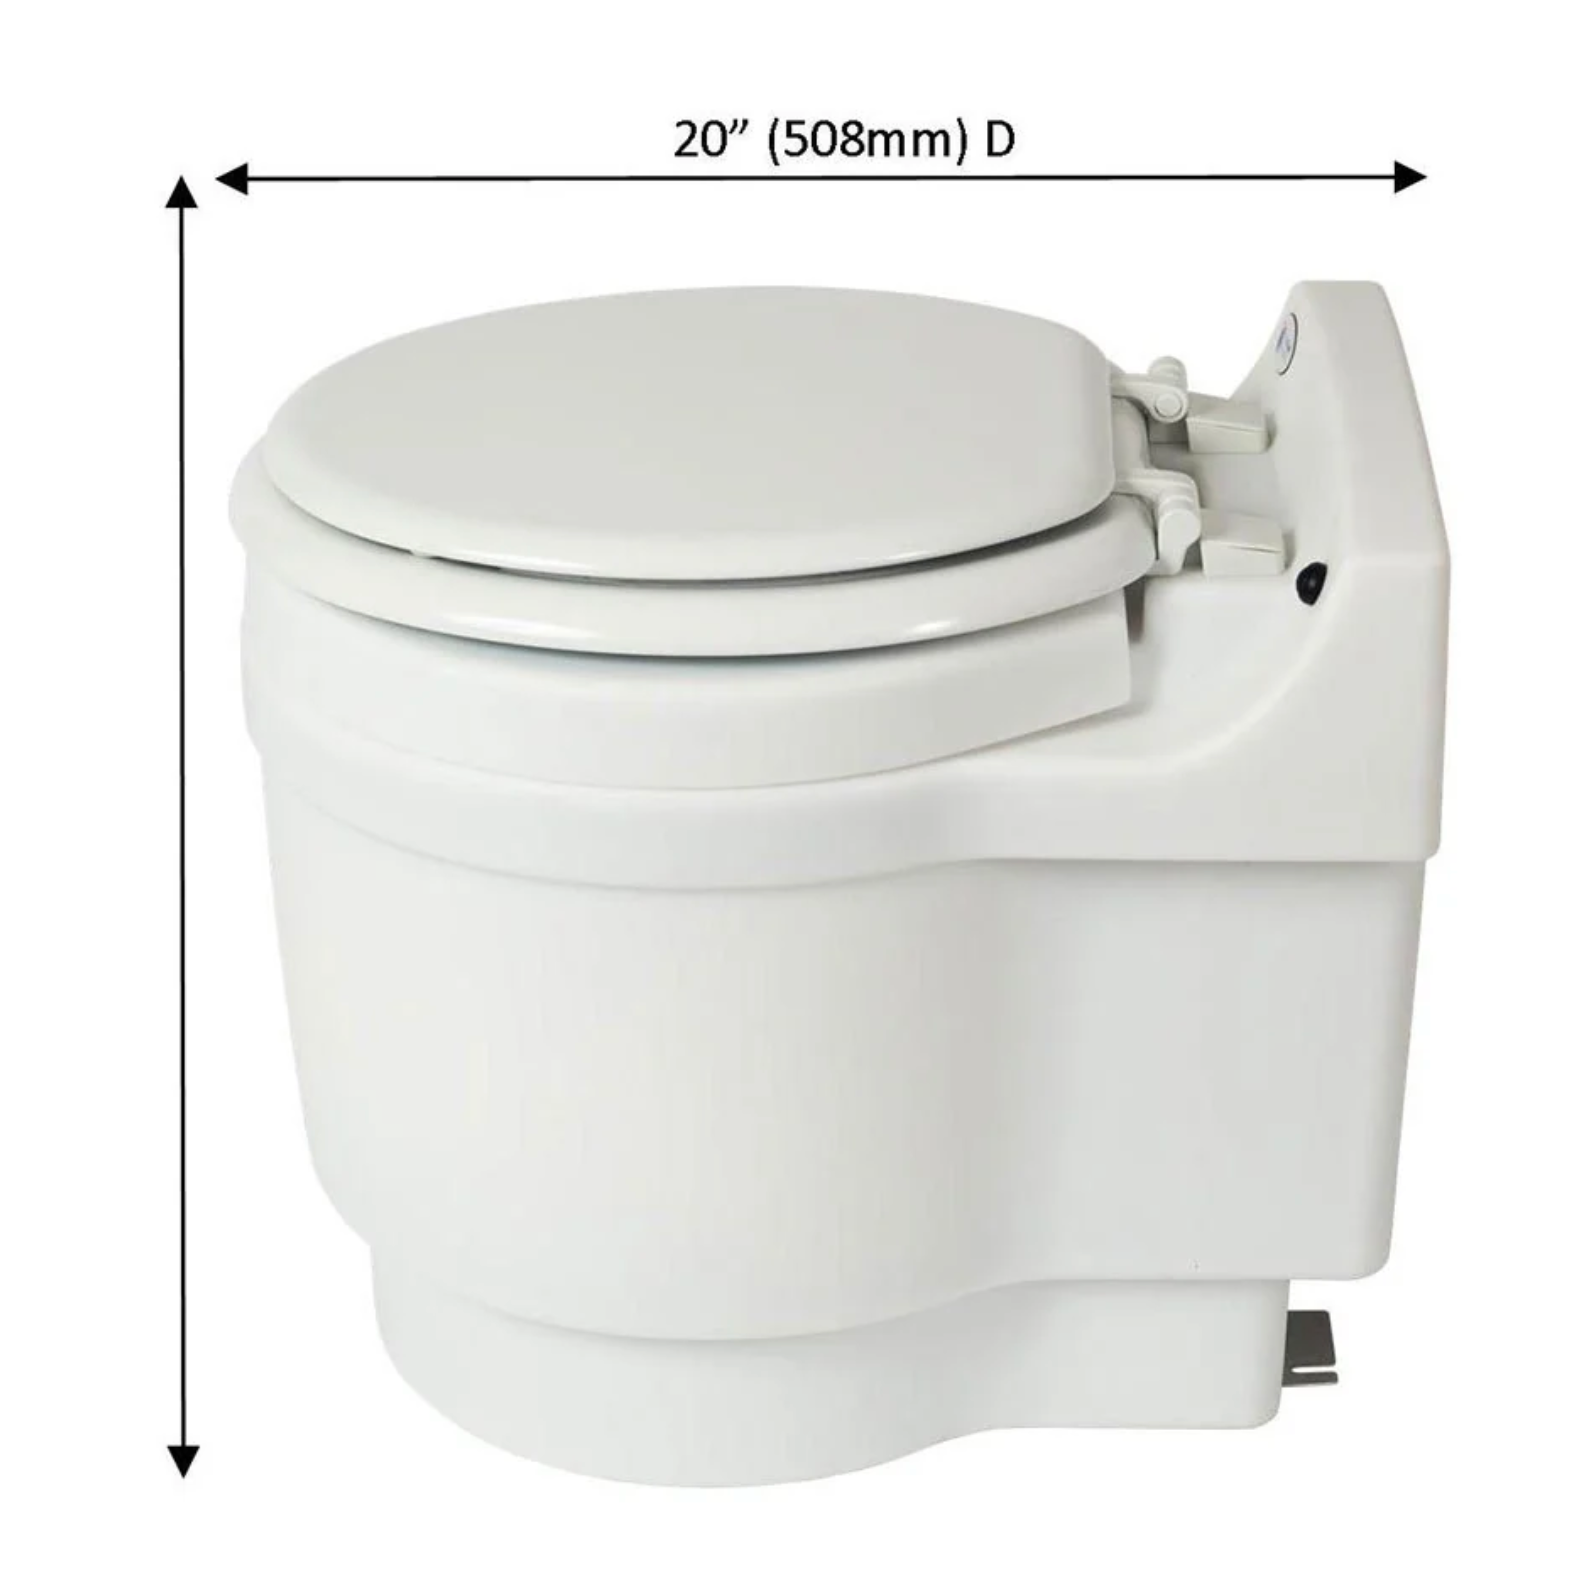 Laveo Dry Flush Portable Electric Waterless Toilet with Battery & Charger DF1045